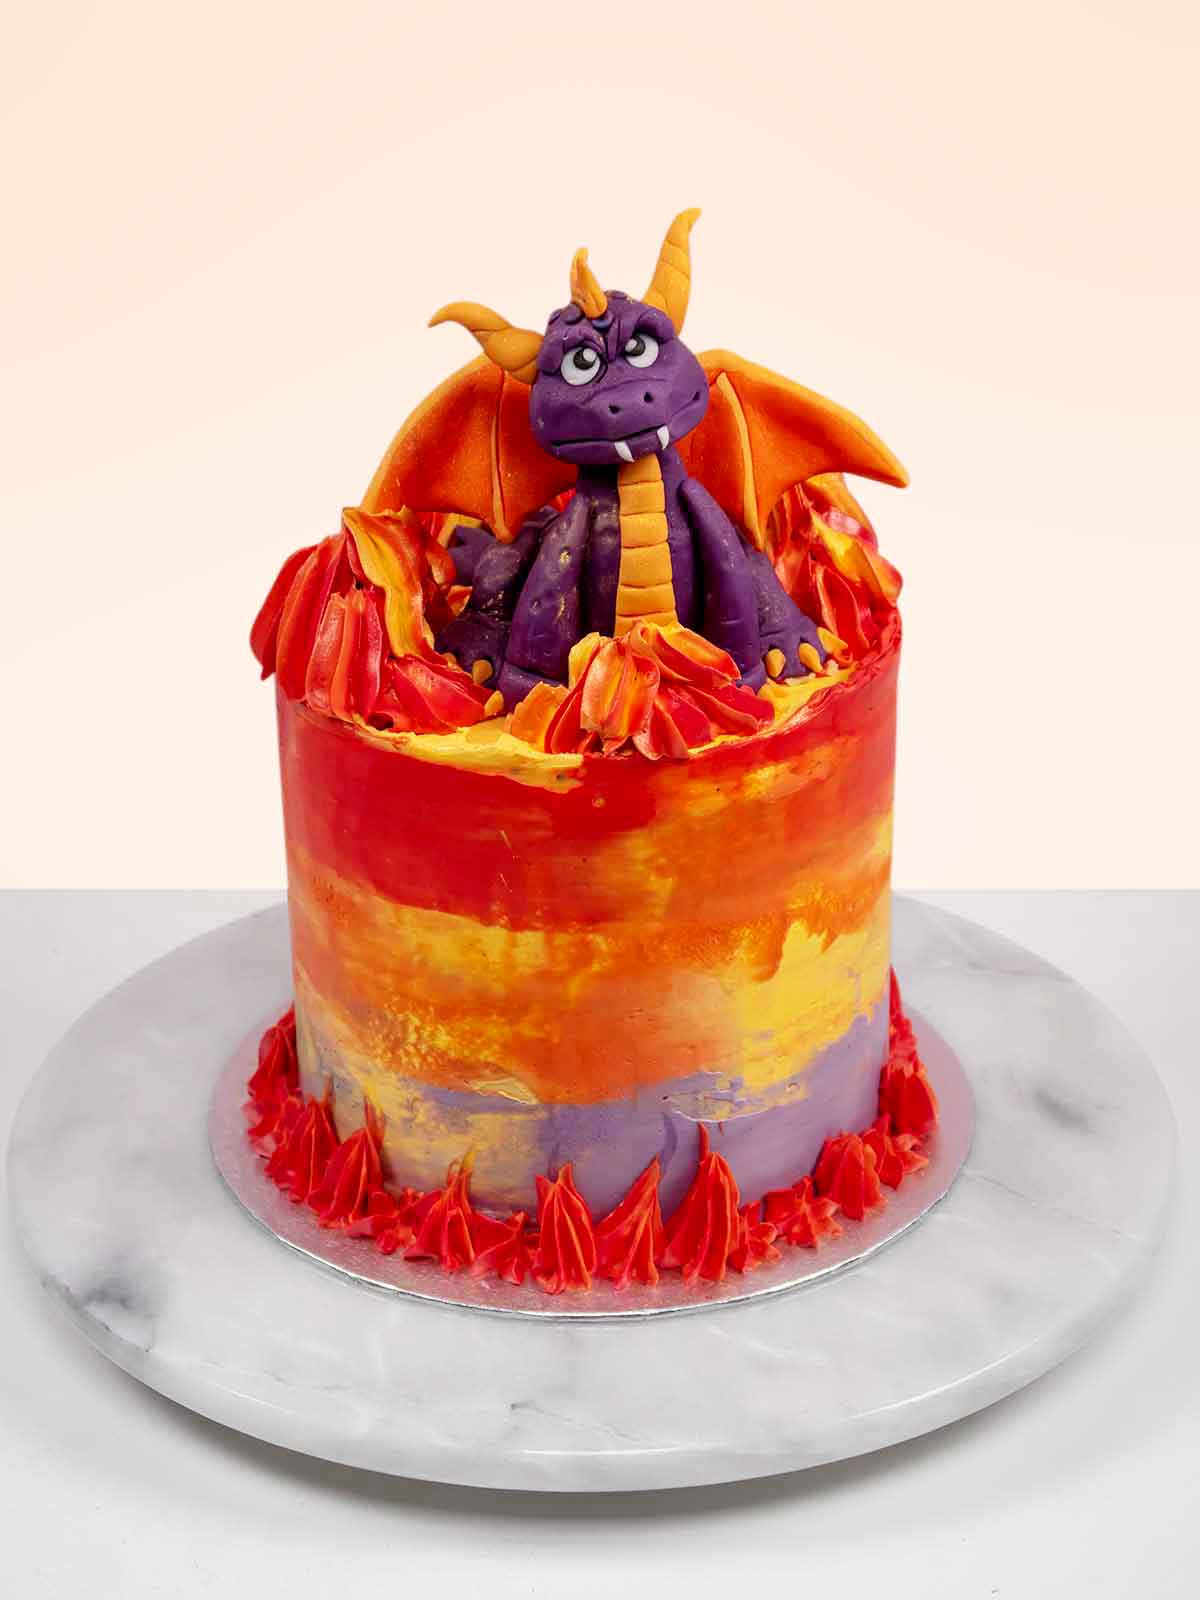 3D Dragon Cake - Designer Cakes by Paige